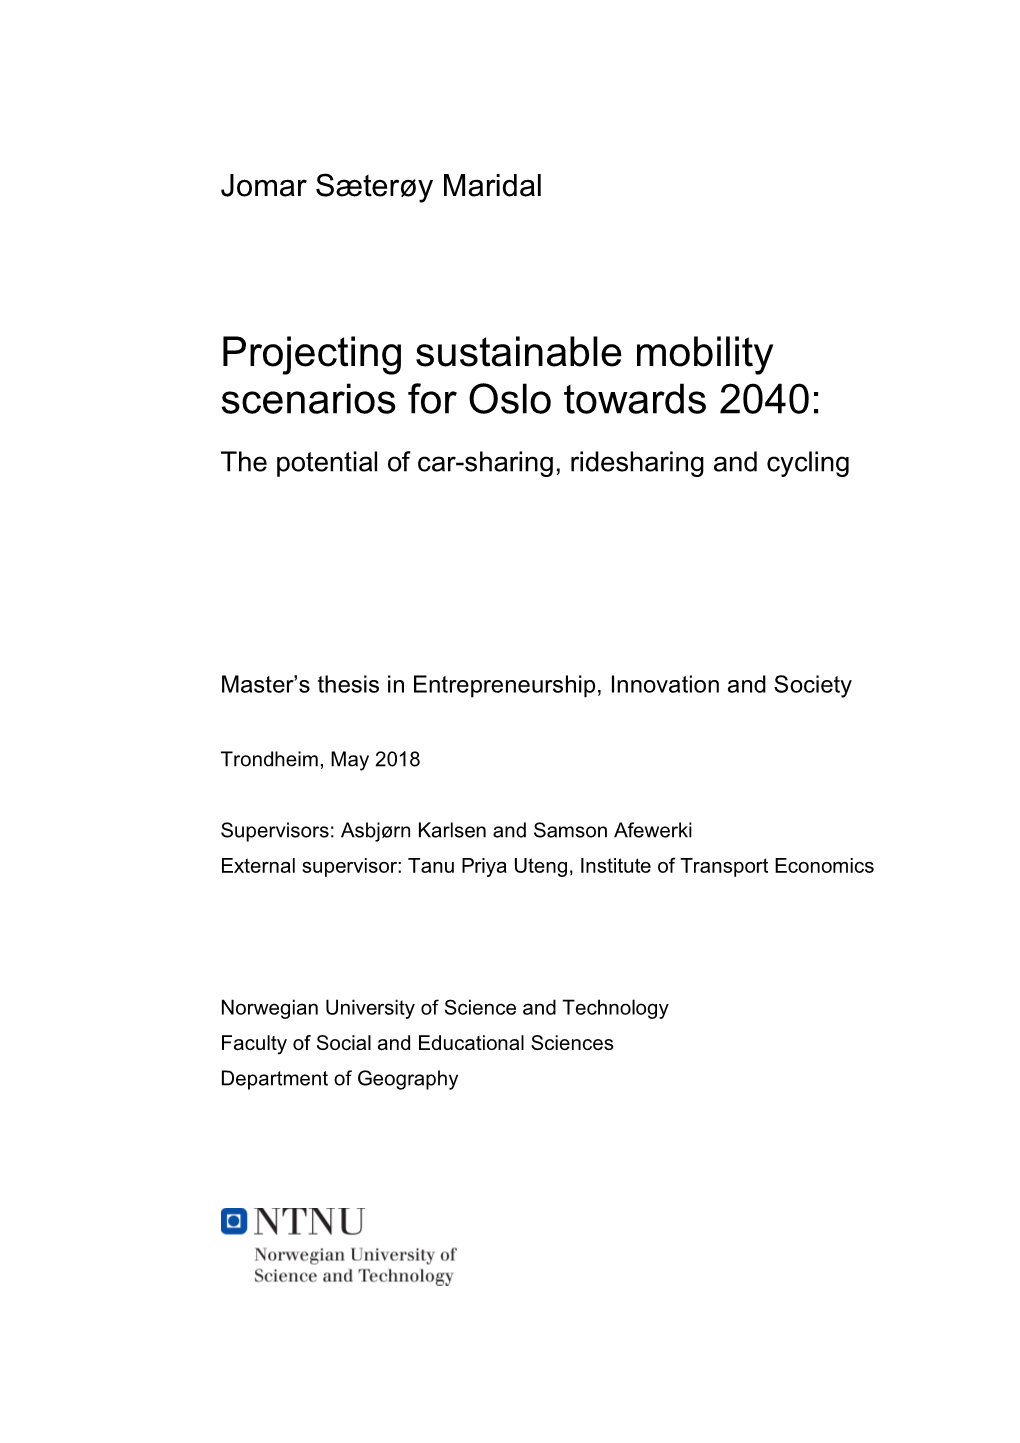 Projecting Sustainable Mobility Scenarios for Oslo Towards 2040